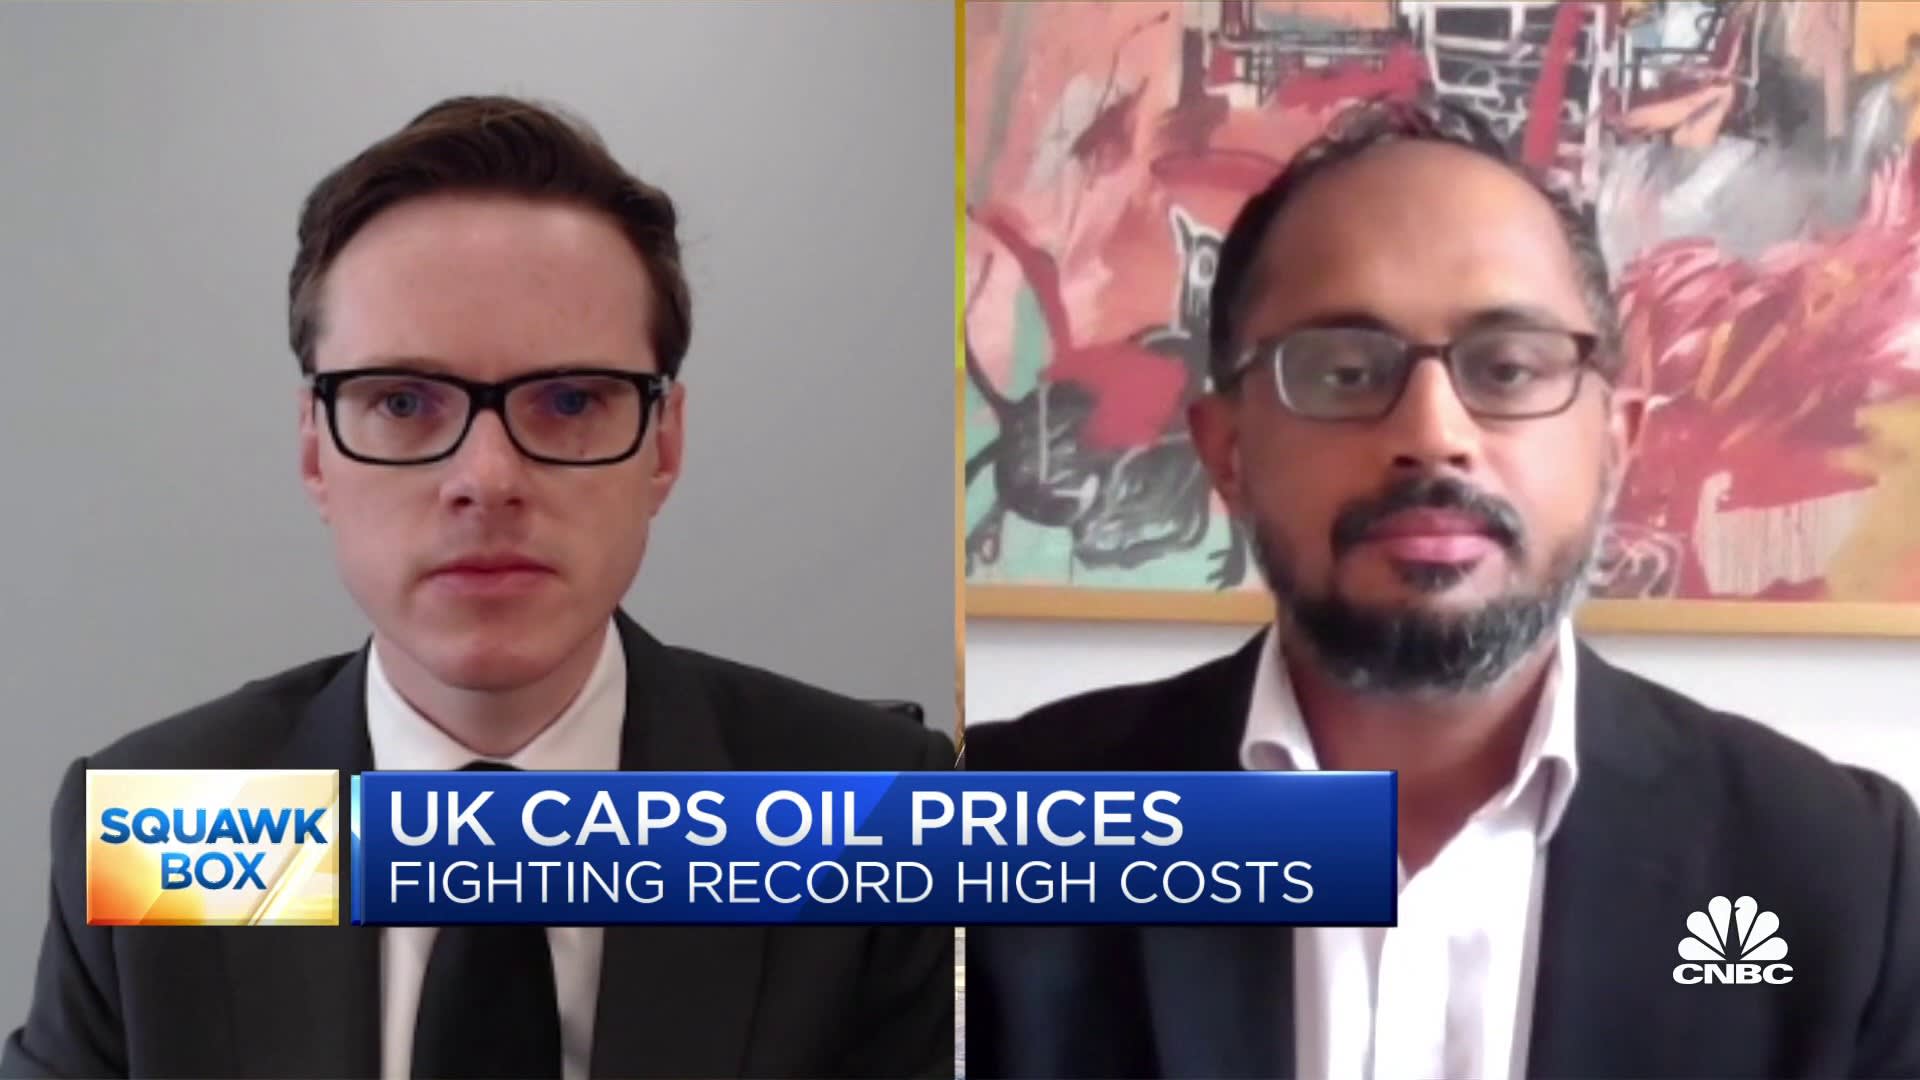 UK taxpayers will have to fund a new oil price cap, says Neuberger Berman's Jonathan Bailey